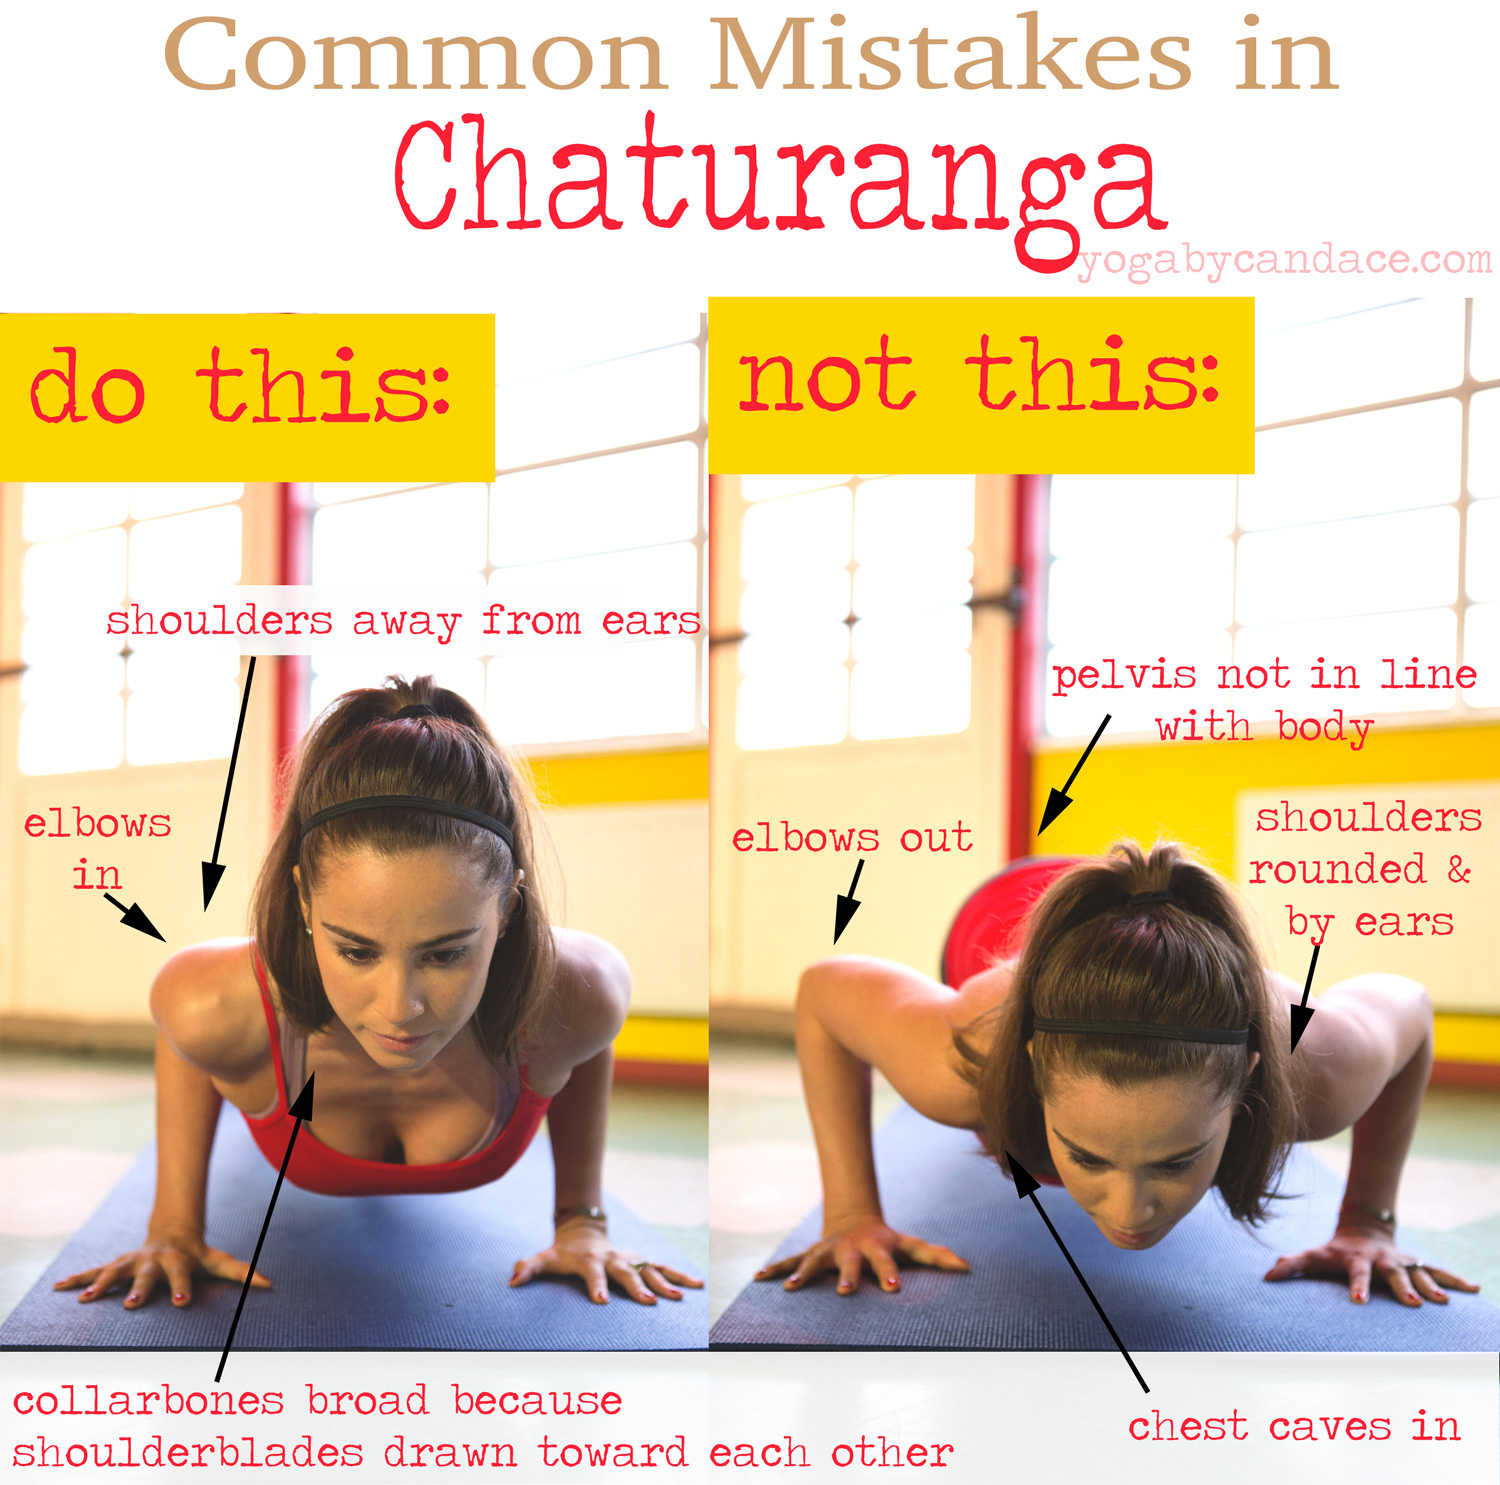 Pin it! Common mistakes in chaturanga and how to fix them.